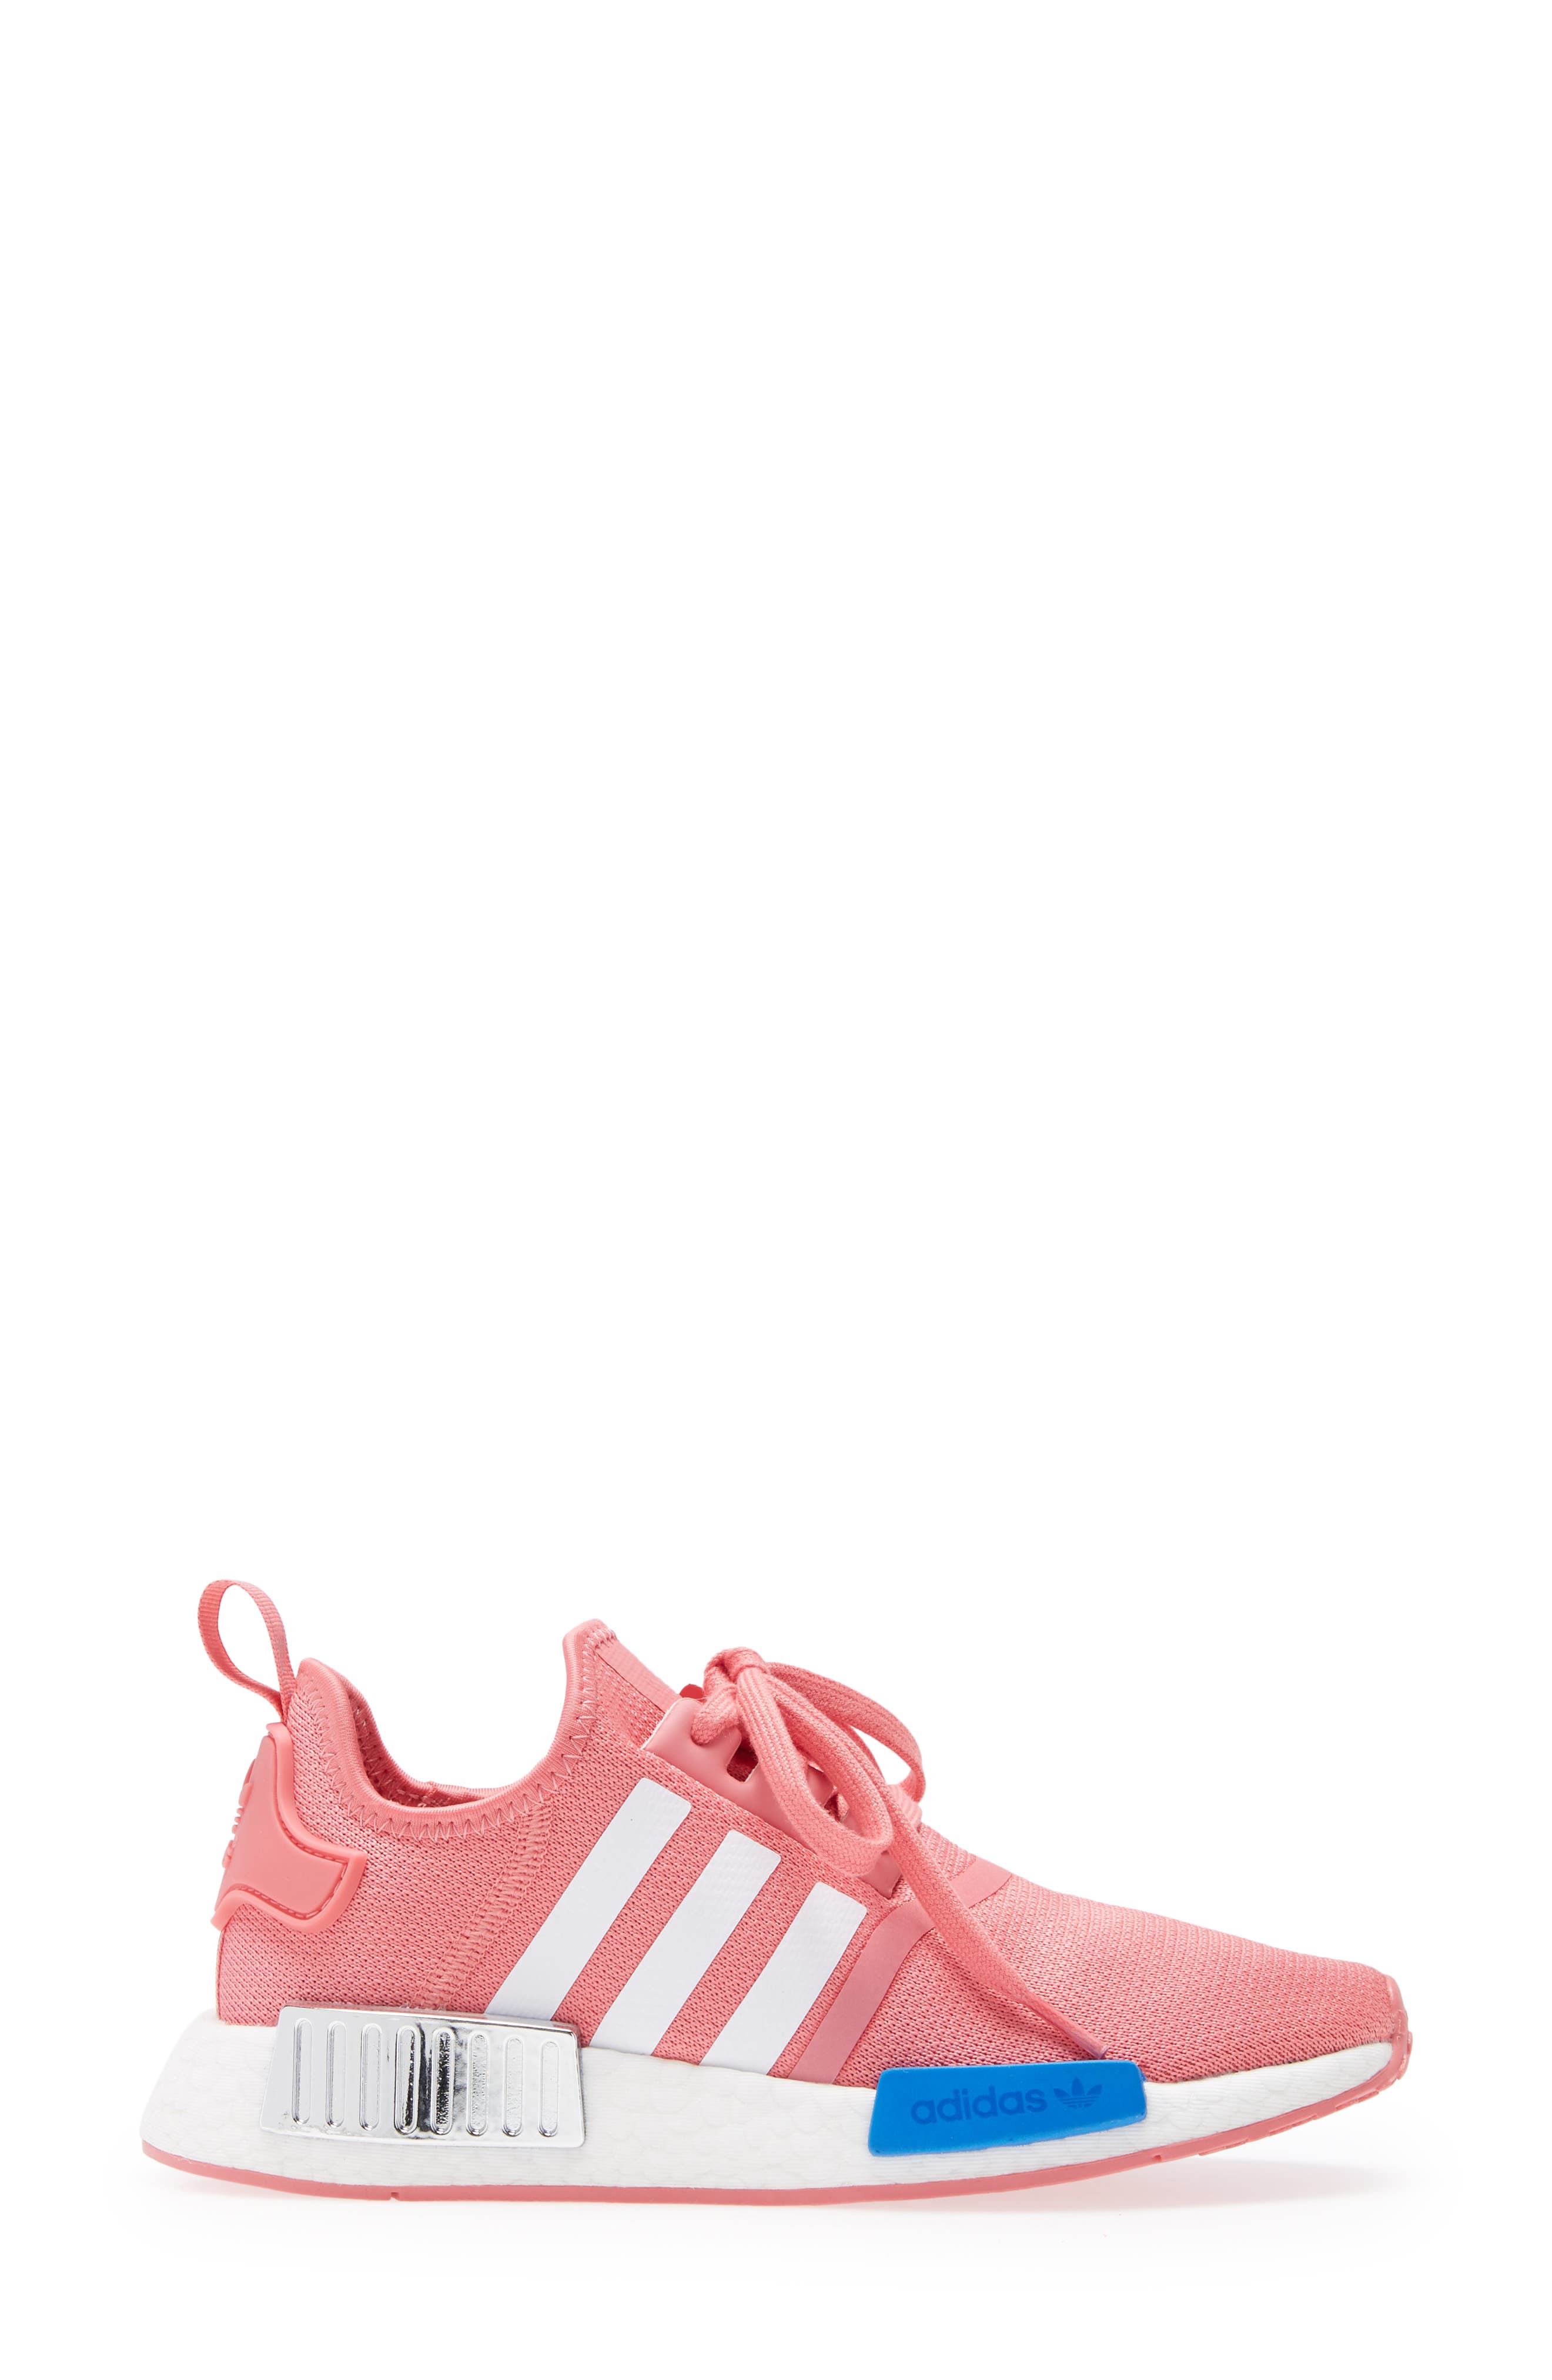 adidas shoes 2016 nmd pink